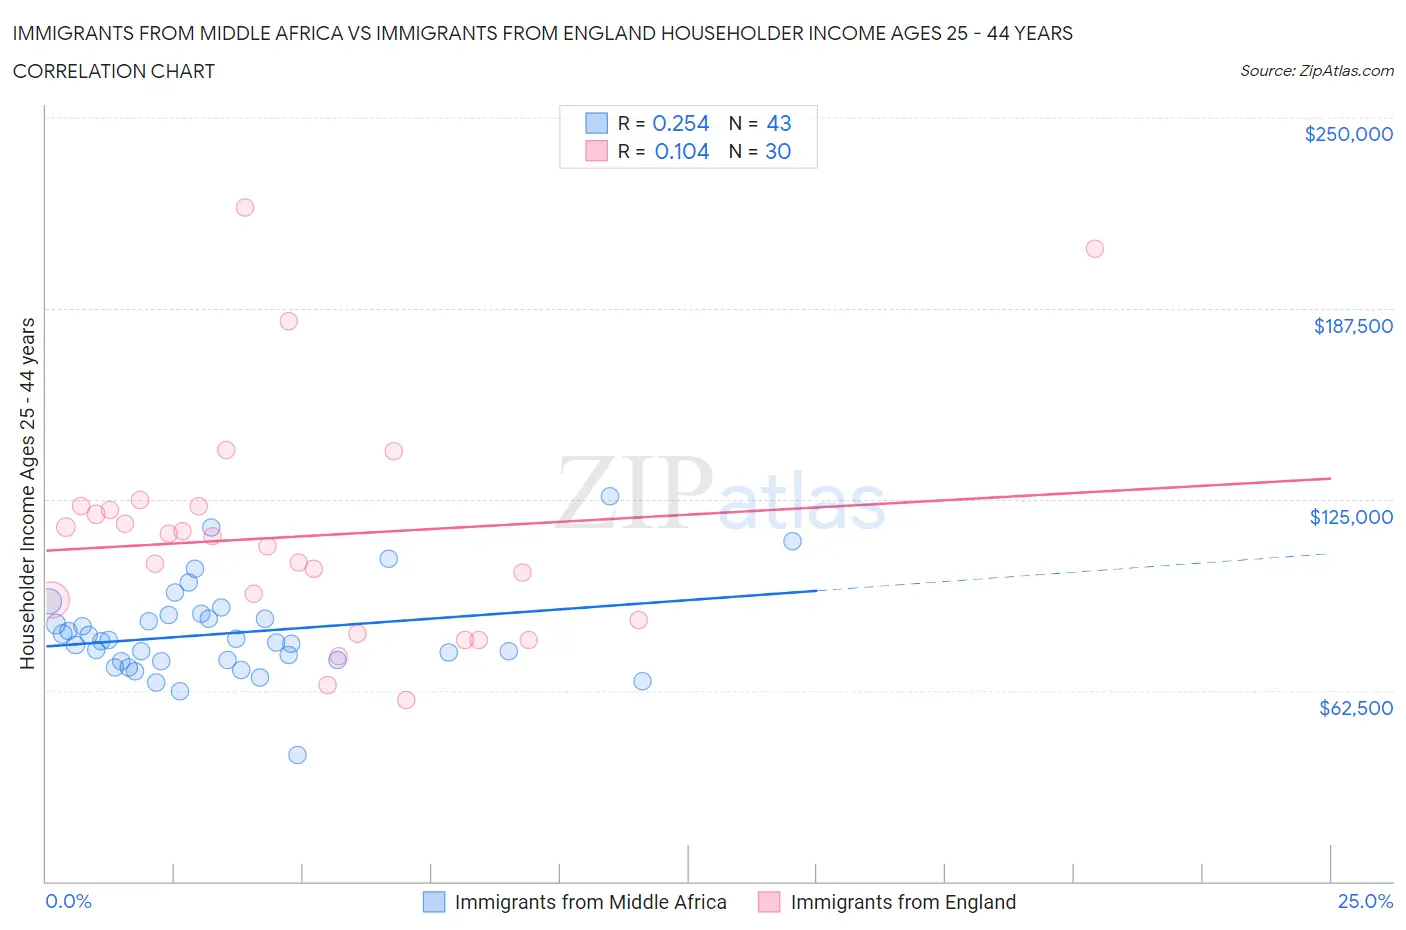 Immigrants from Middle Africa vs Immigrants from England Householder Income Ages 25 - 44 years